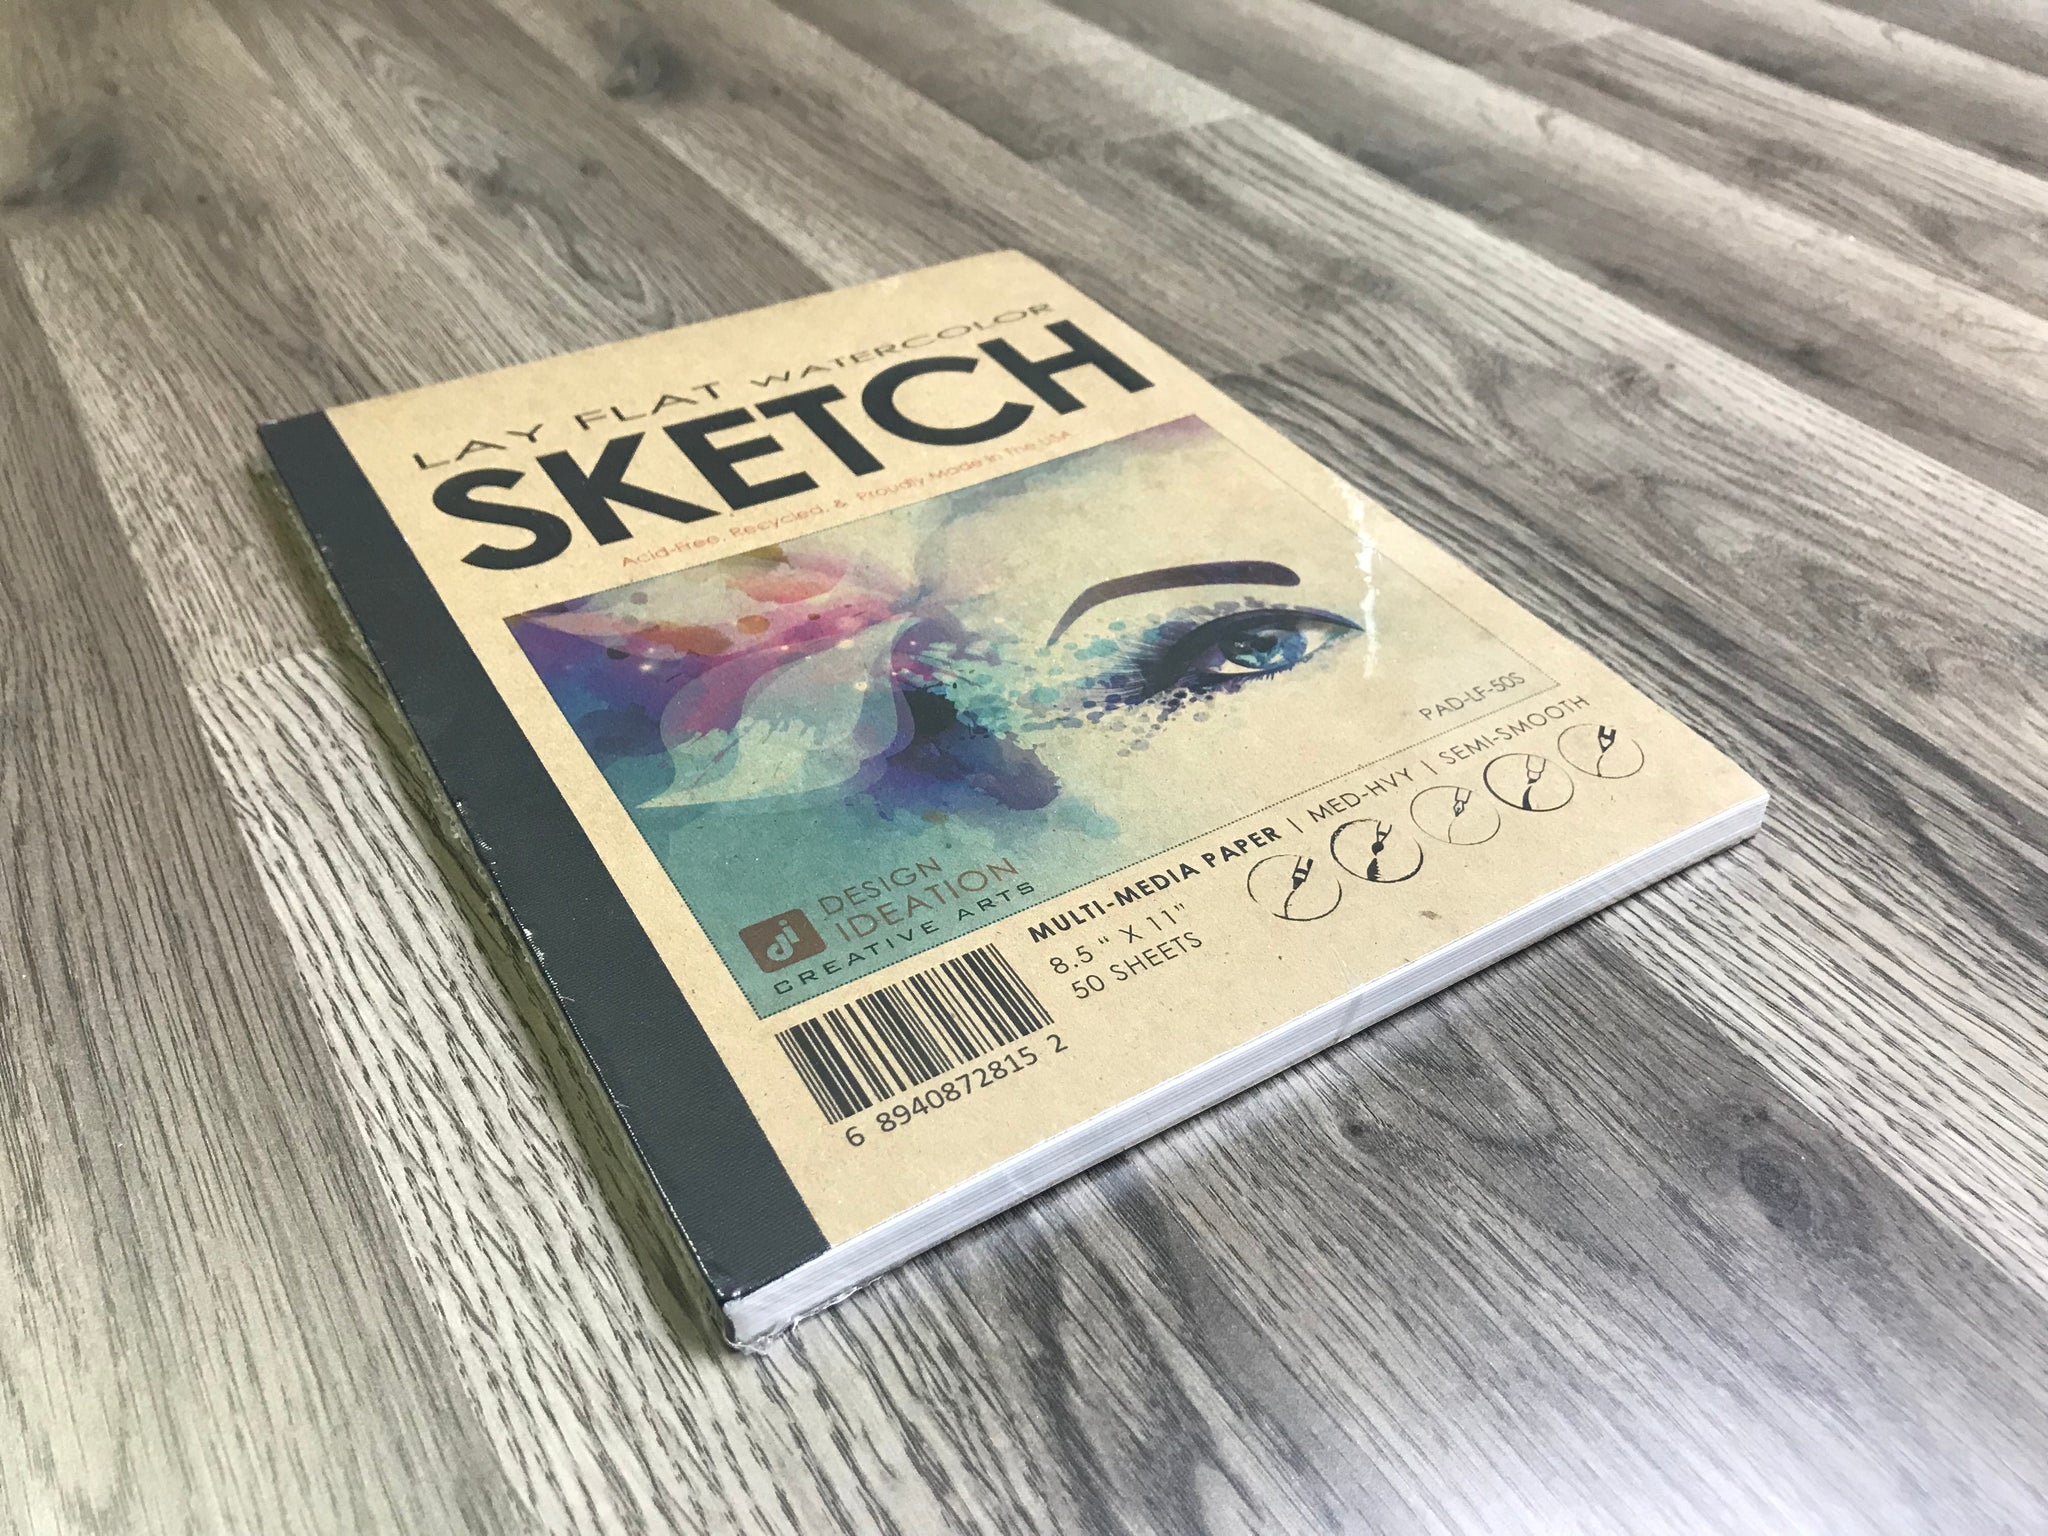 LAY FLAT Sketchbook. Removable Sheet, Journal Style SKETCH Book for Pencil,  Ink, Marker, Charcoal and Watercolor Paints. 8.5 X 11 